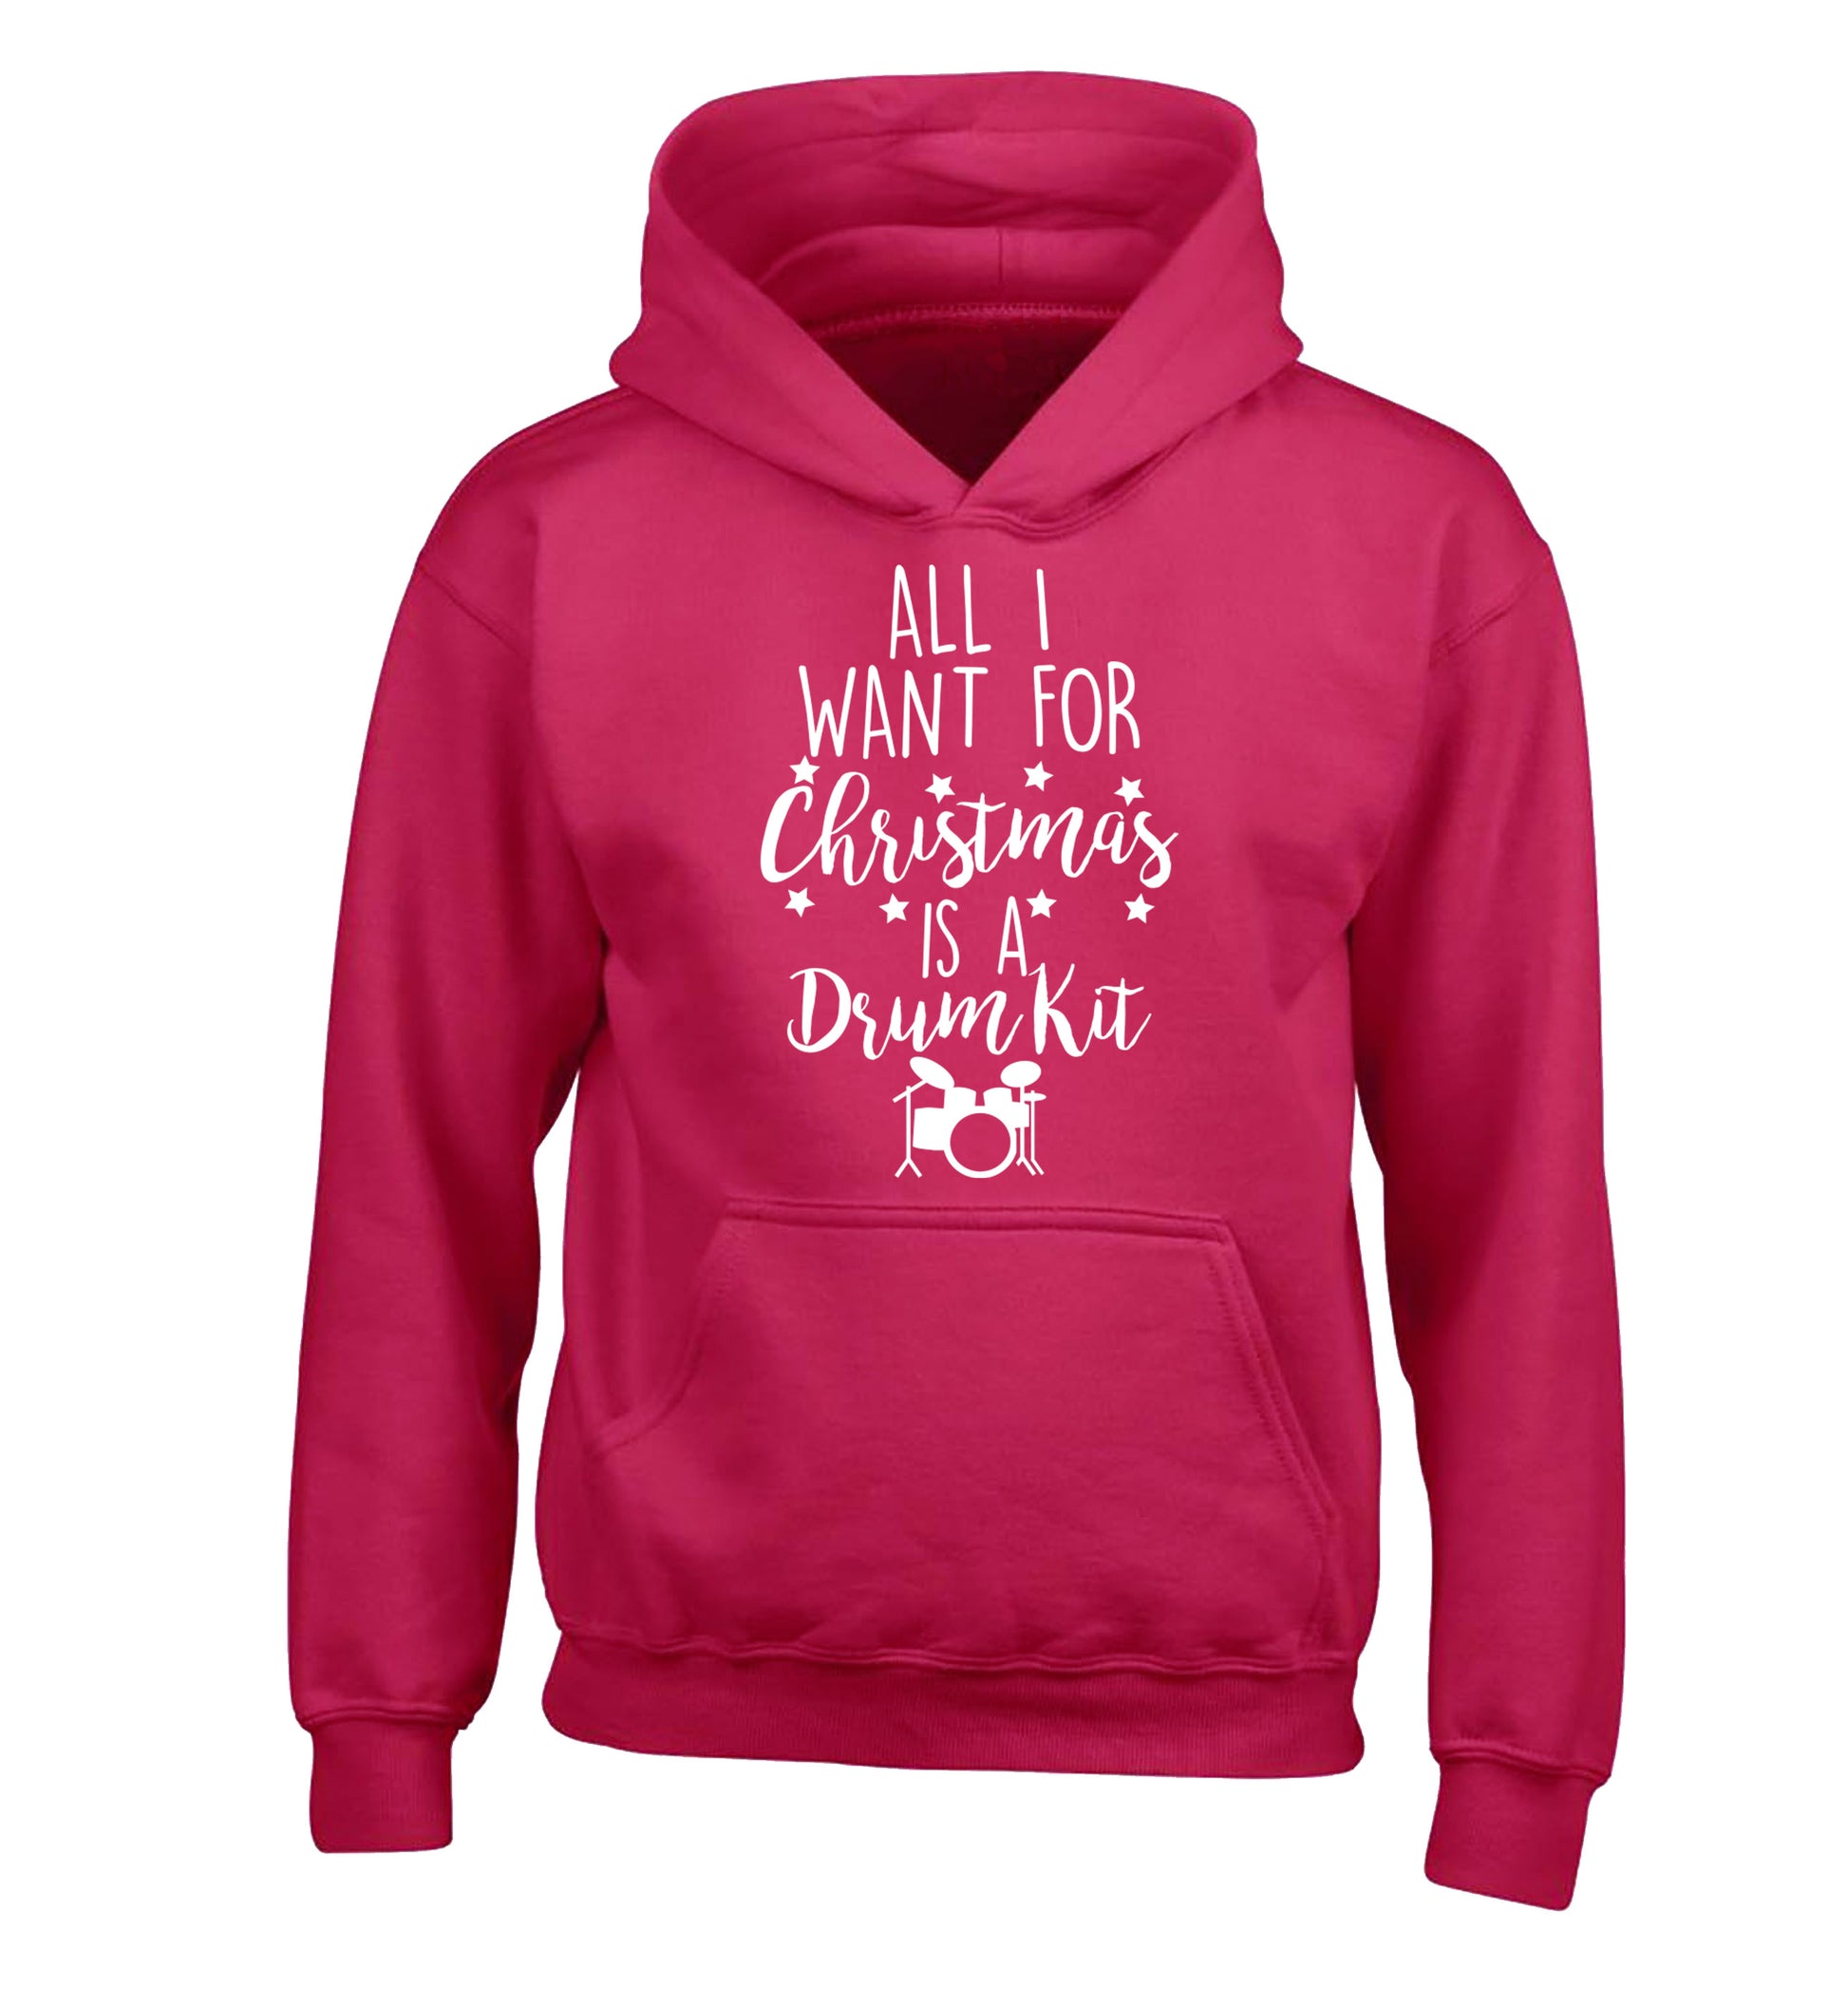 All I want for Christmas is a drum kit! children's pink hoodie 12-14 Years